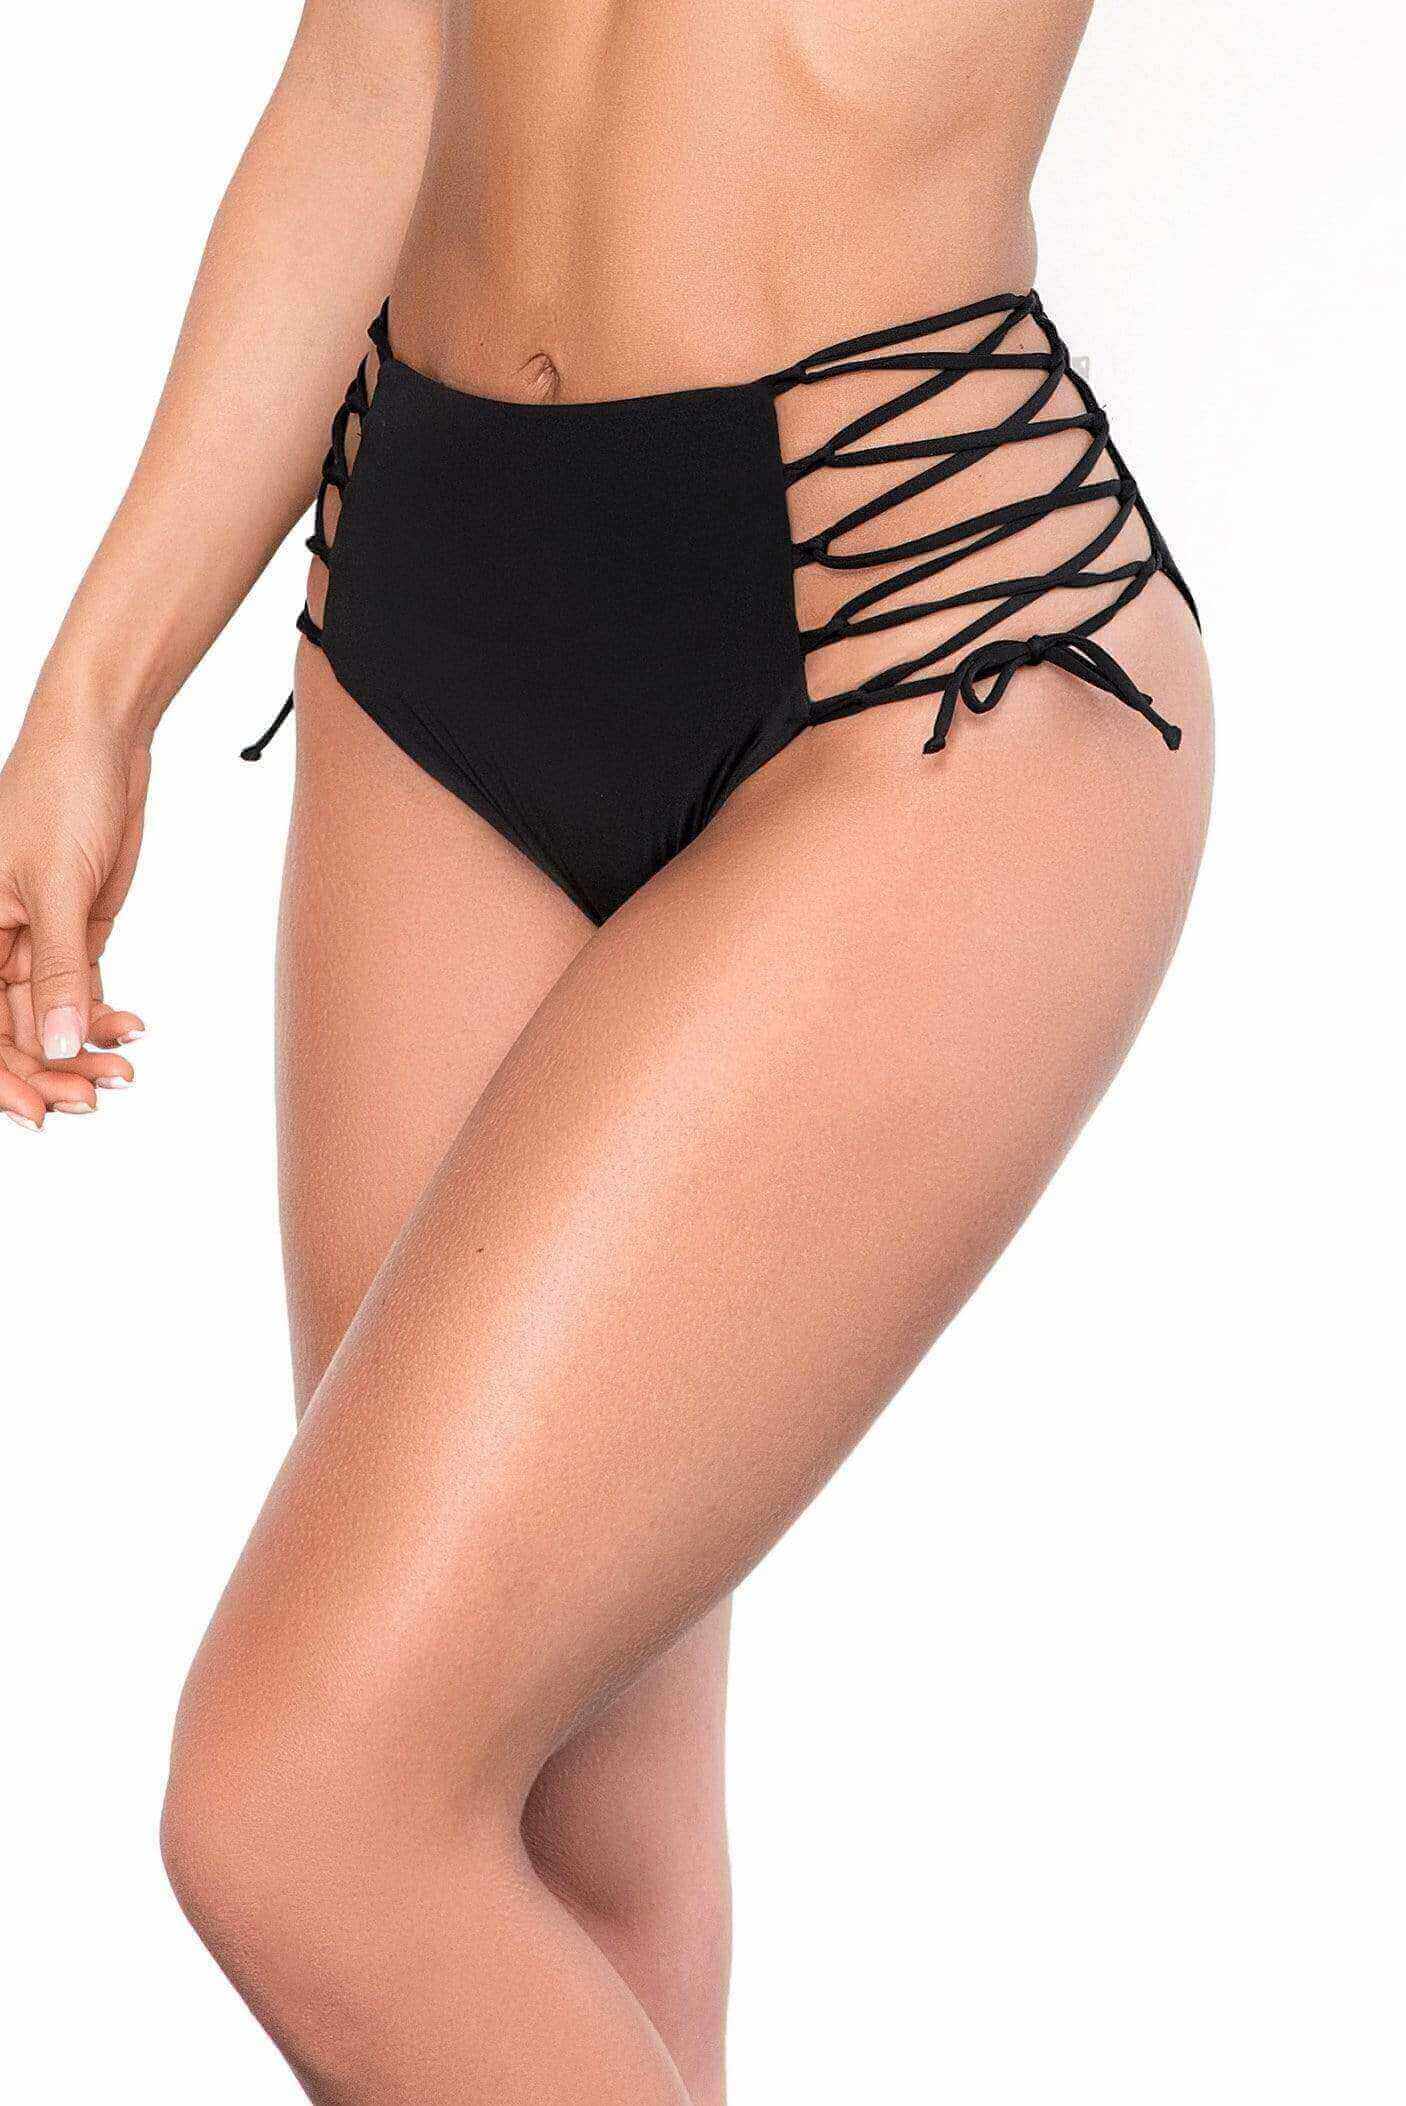 Mapale Apparel & Accessories > Clothing > Swimwear Black / S/M Black Strap Side Tie High Waist Bottom Separates (Many colors available) Black Strap Side Tie High Waist Bottom Separates | MAPALE 6649